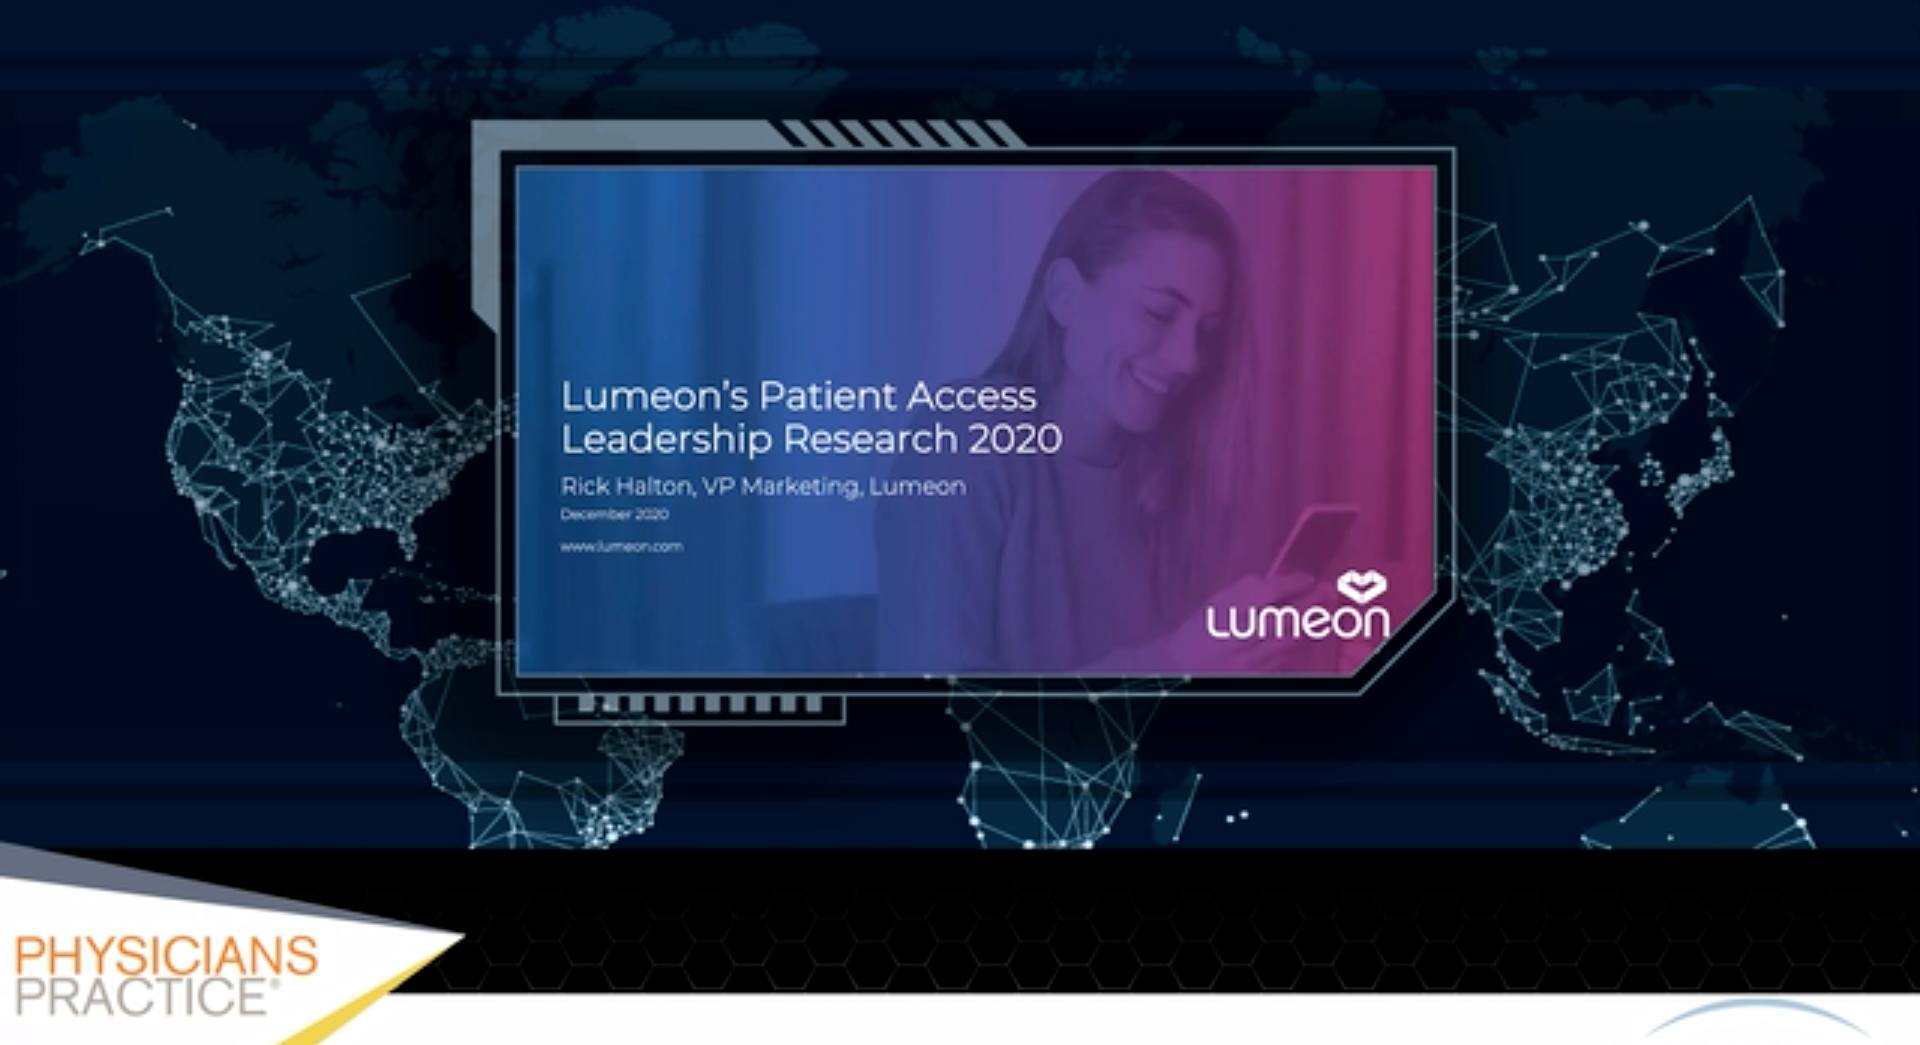 Patient access leadership challenges during the pandemic